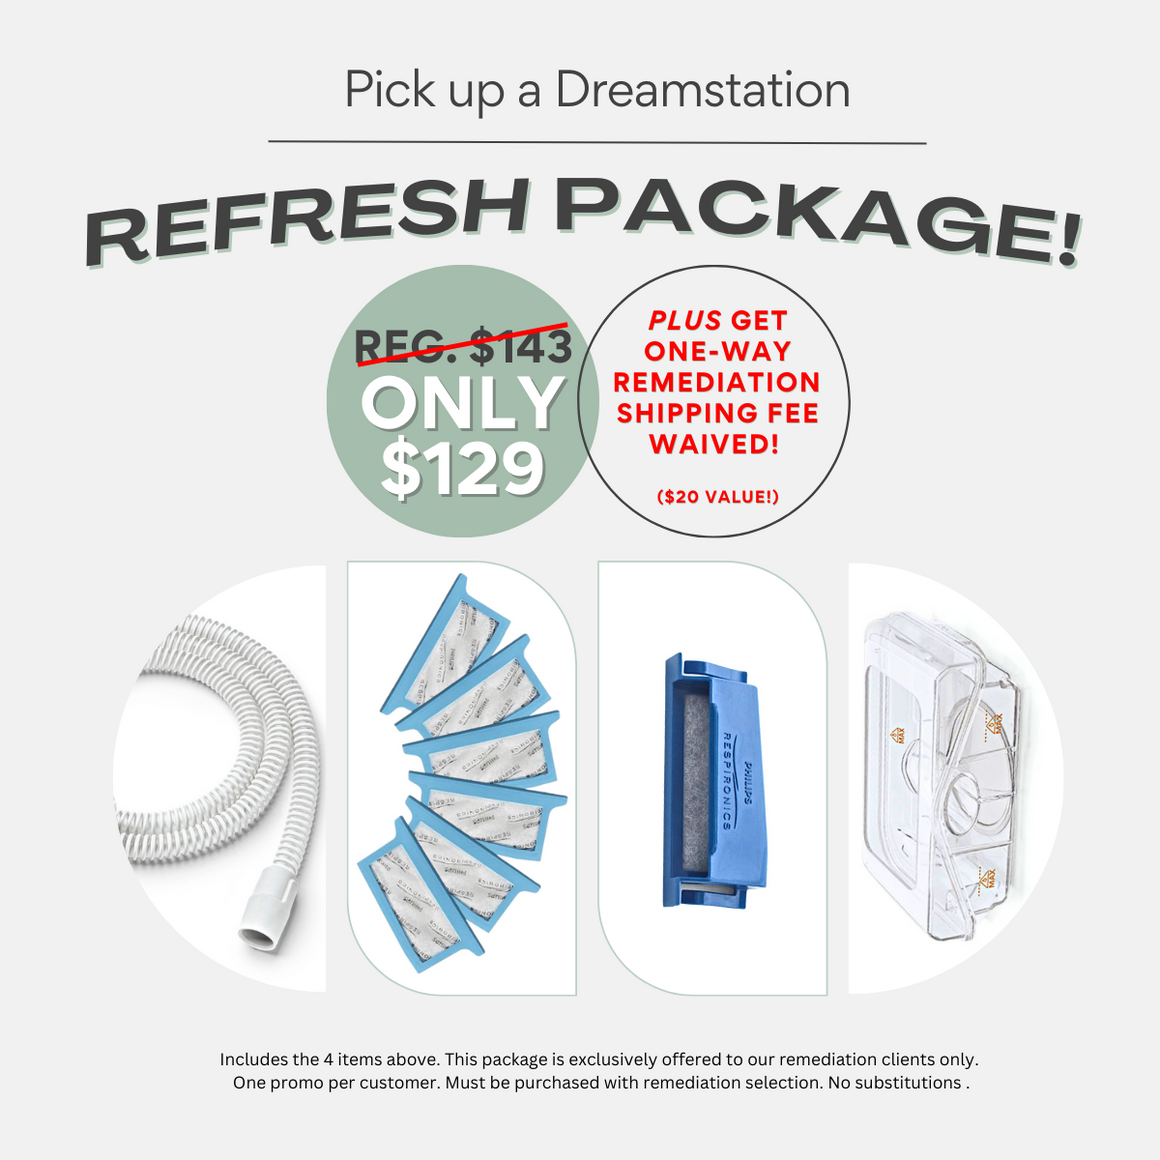 Dreamstation Refresh Package